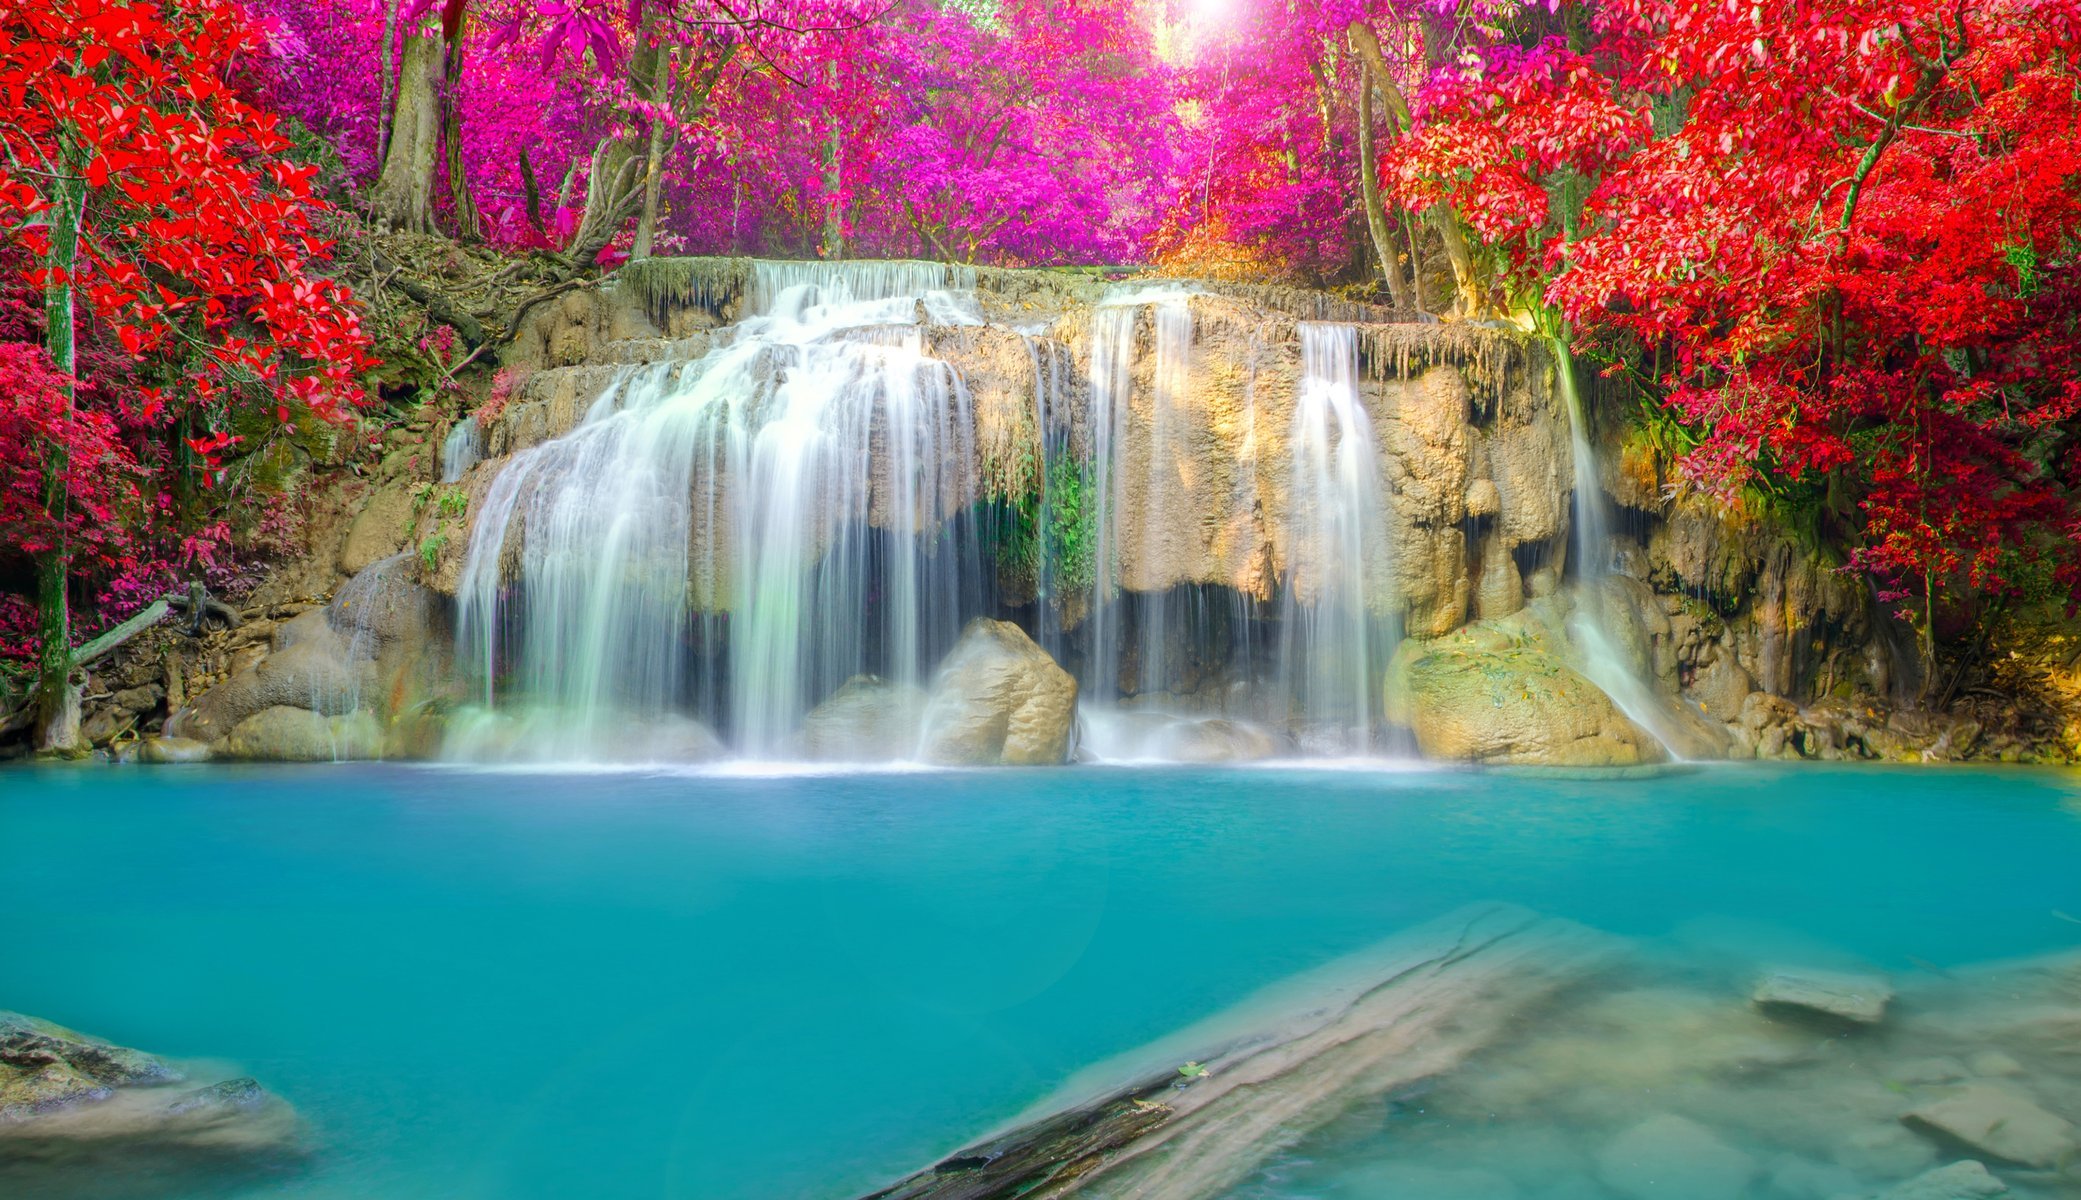 picture background wallpaper,waterfall,body of water,natural landscape,nature,water resources